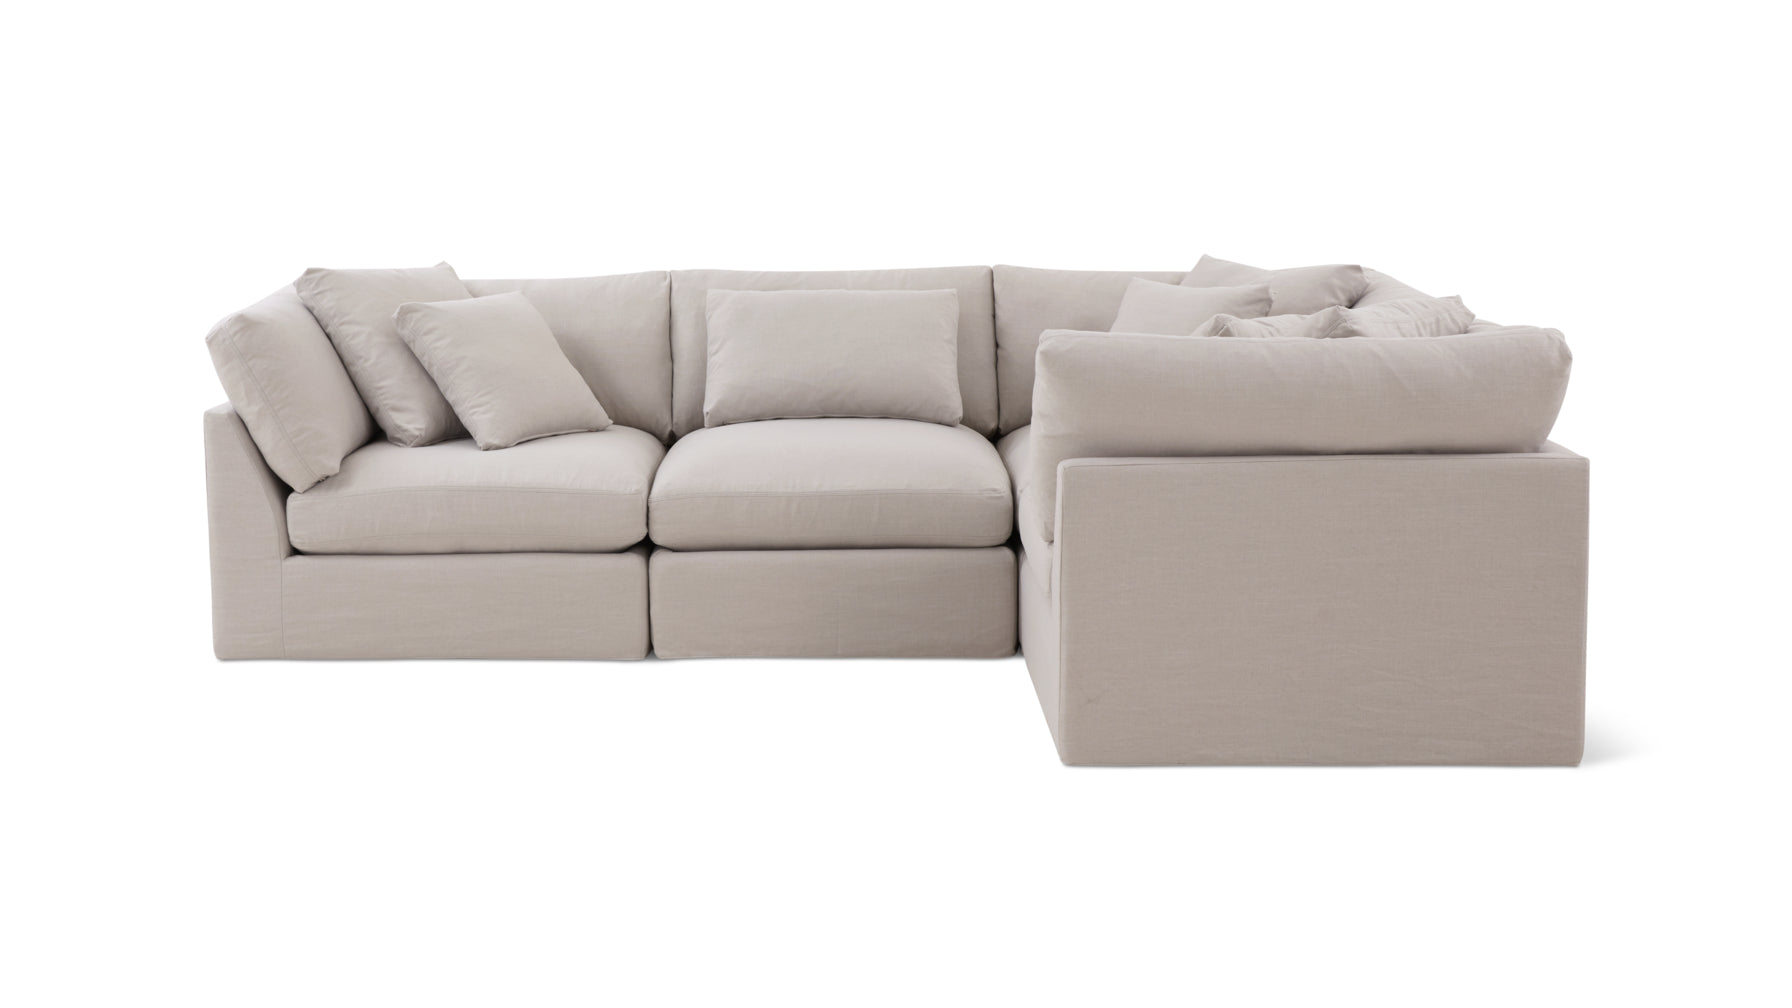 Get Together™ 4-Piece Modular Sectional Closed, Large, Clay - Image 1